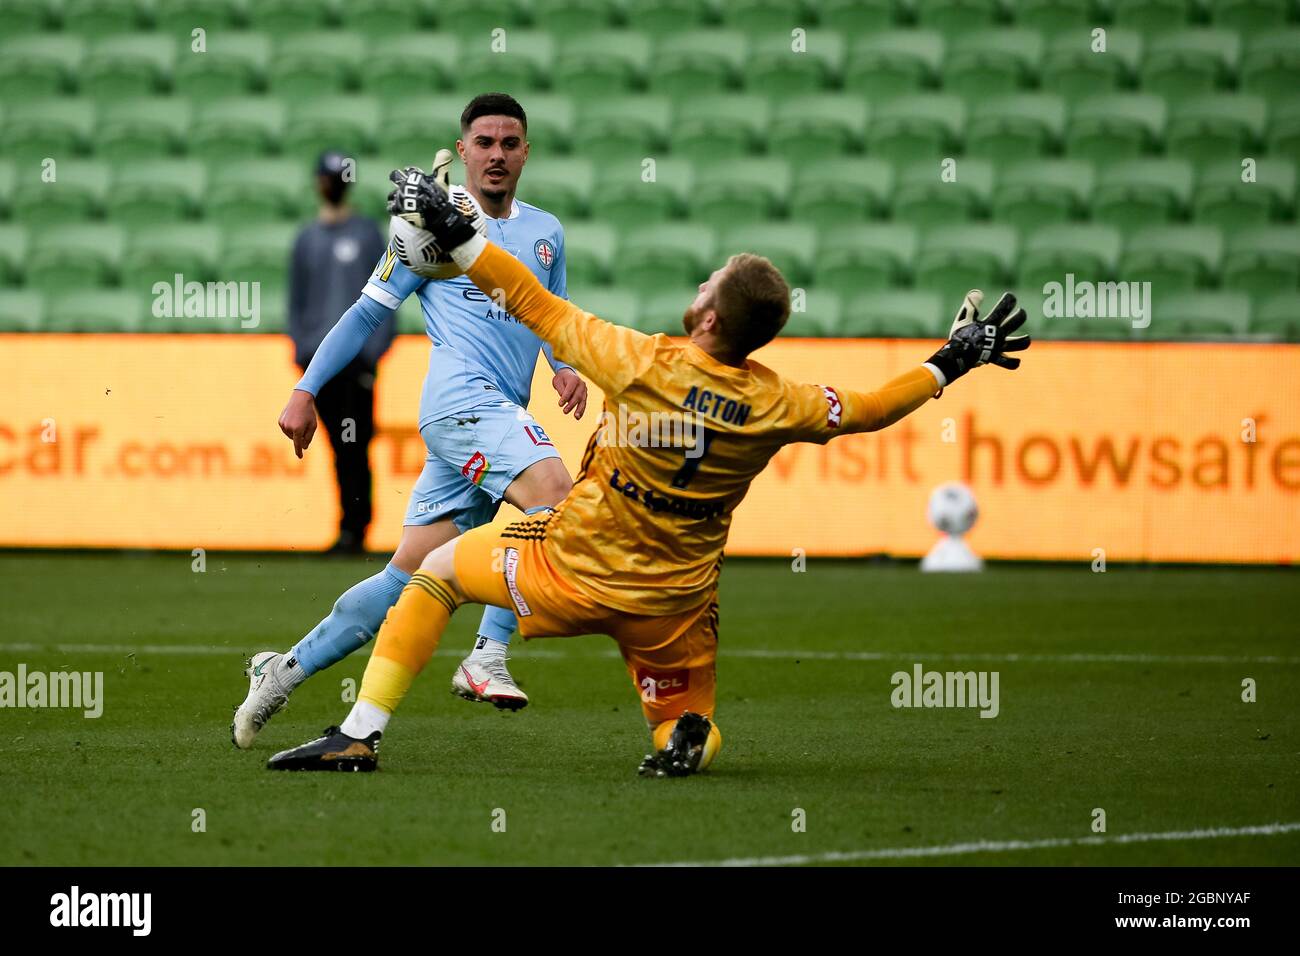 Matt Acton of Melbourne Victory blocks the ball. Credit: Dave Hewison/Speed Media/Alamy Live News Stock Photo